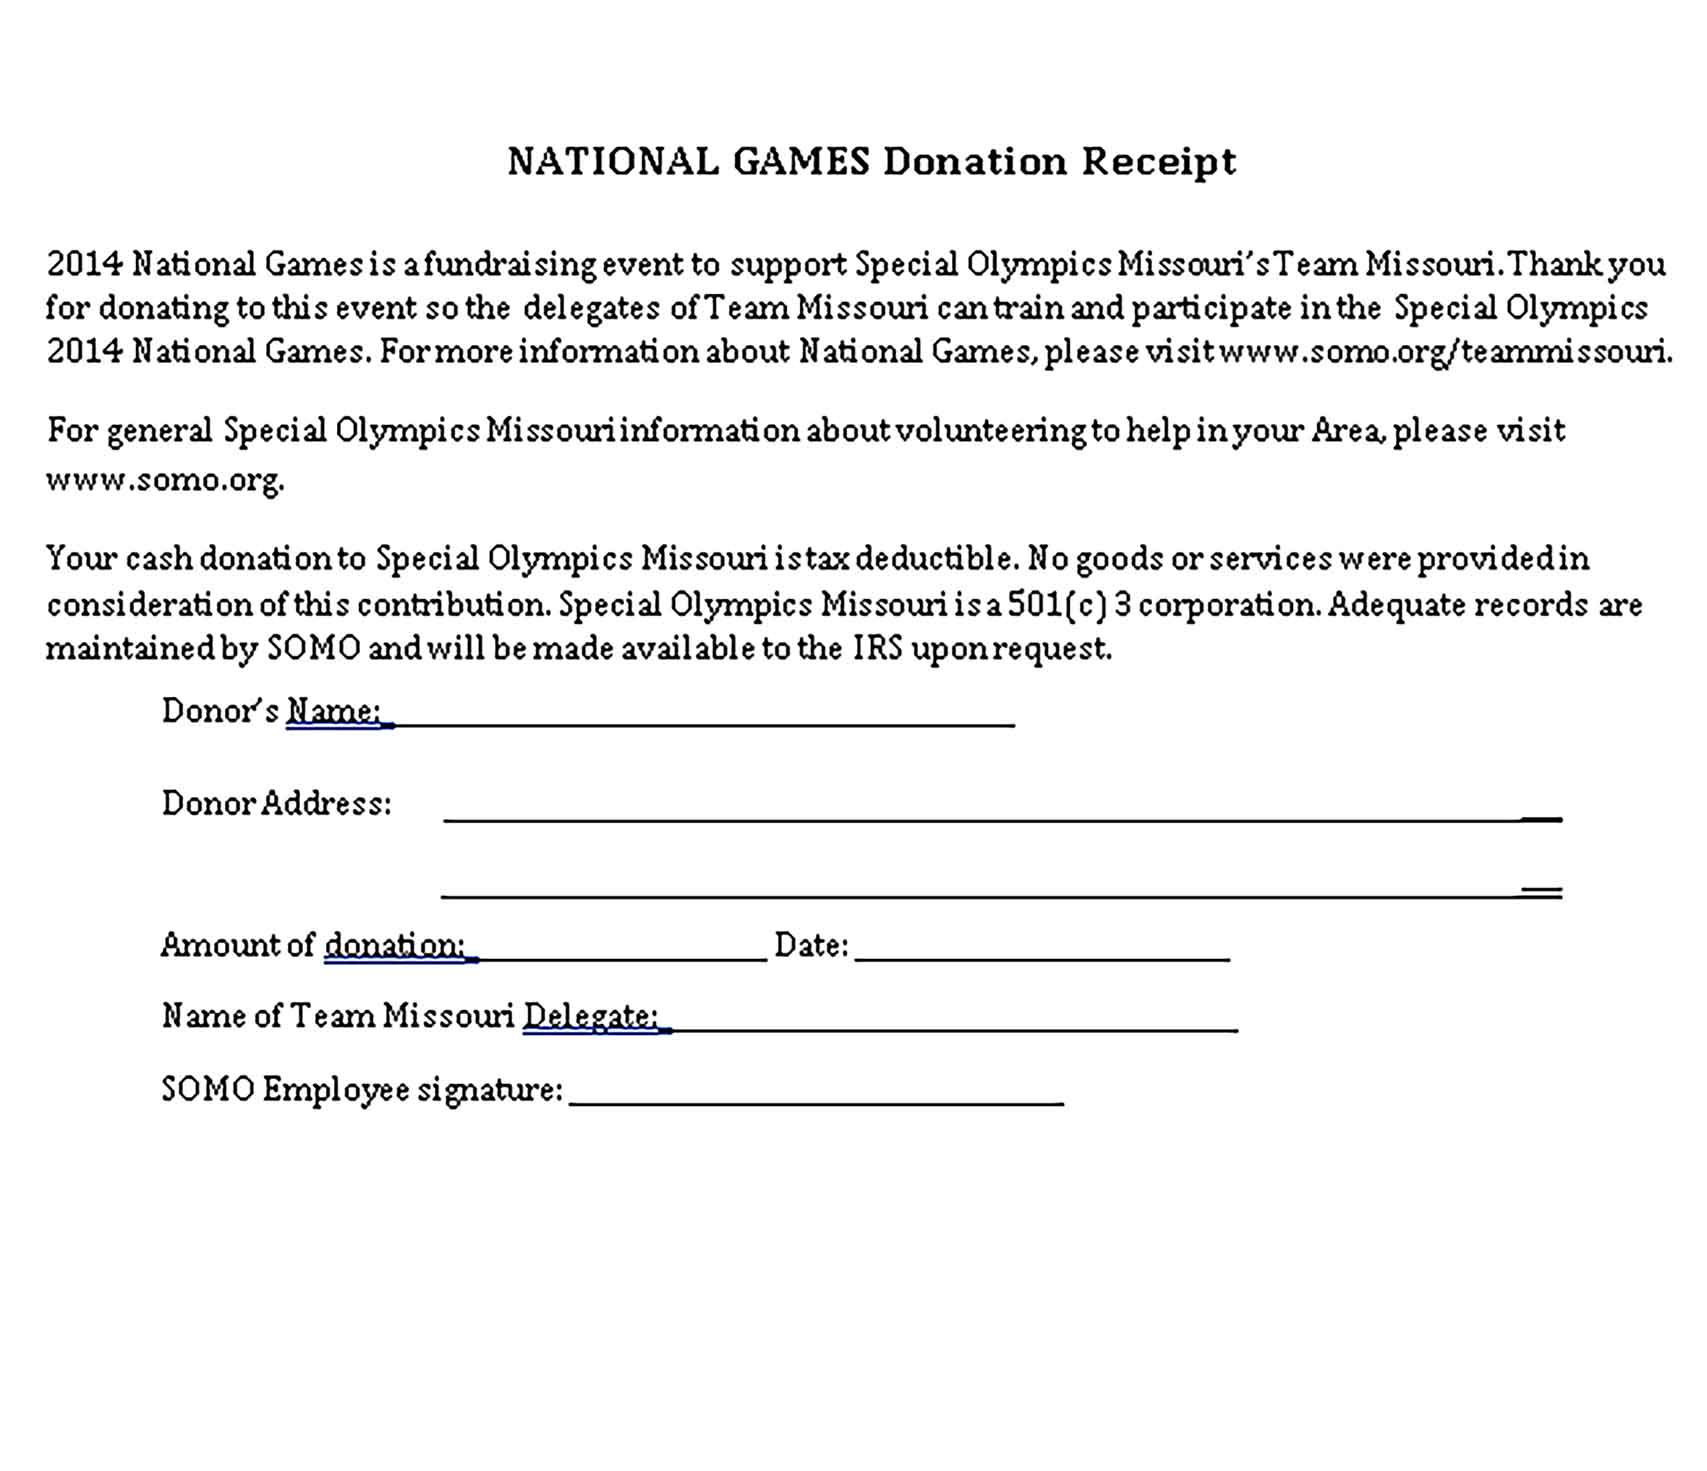 Sample National Games Donation Receipt Templates